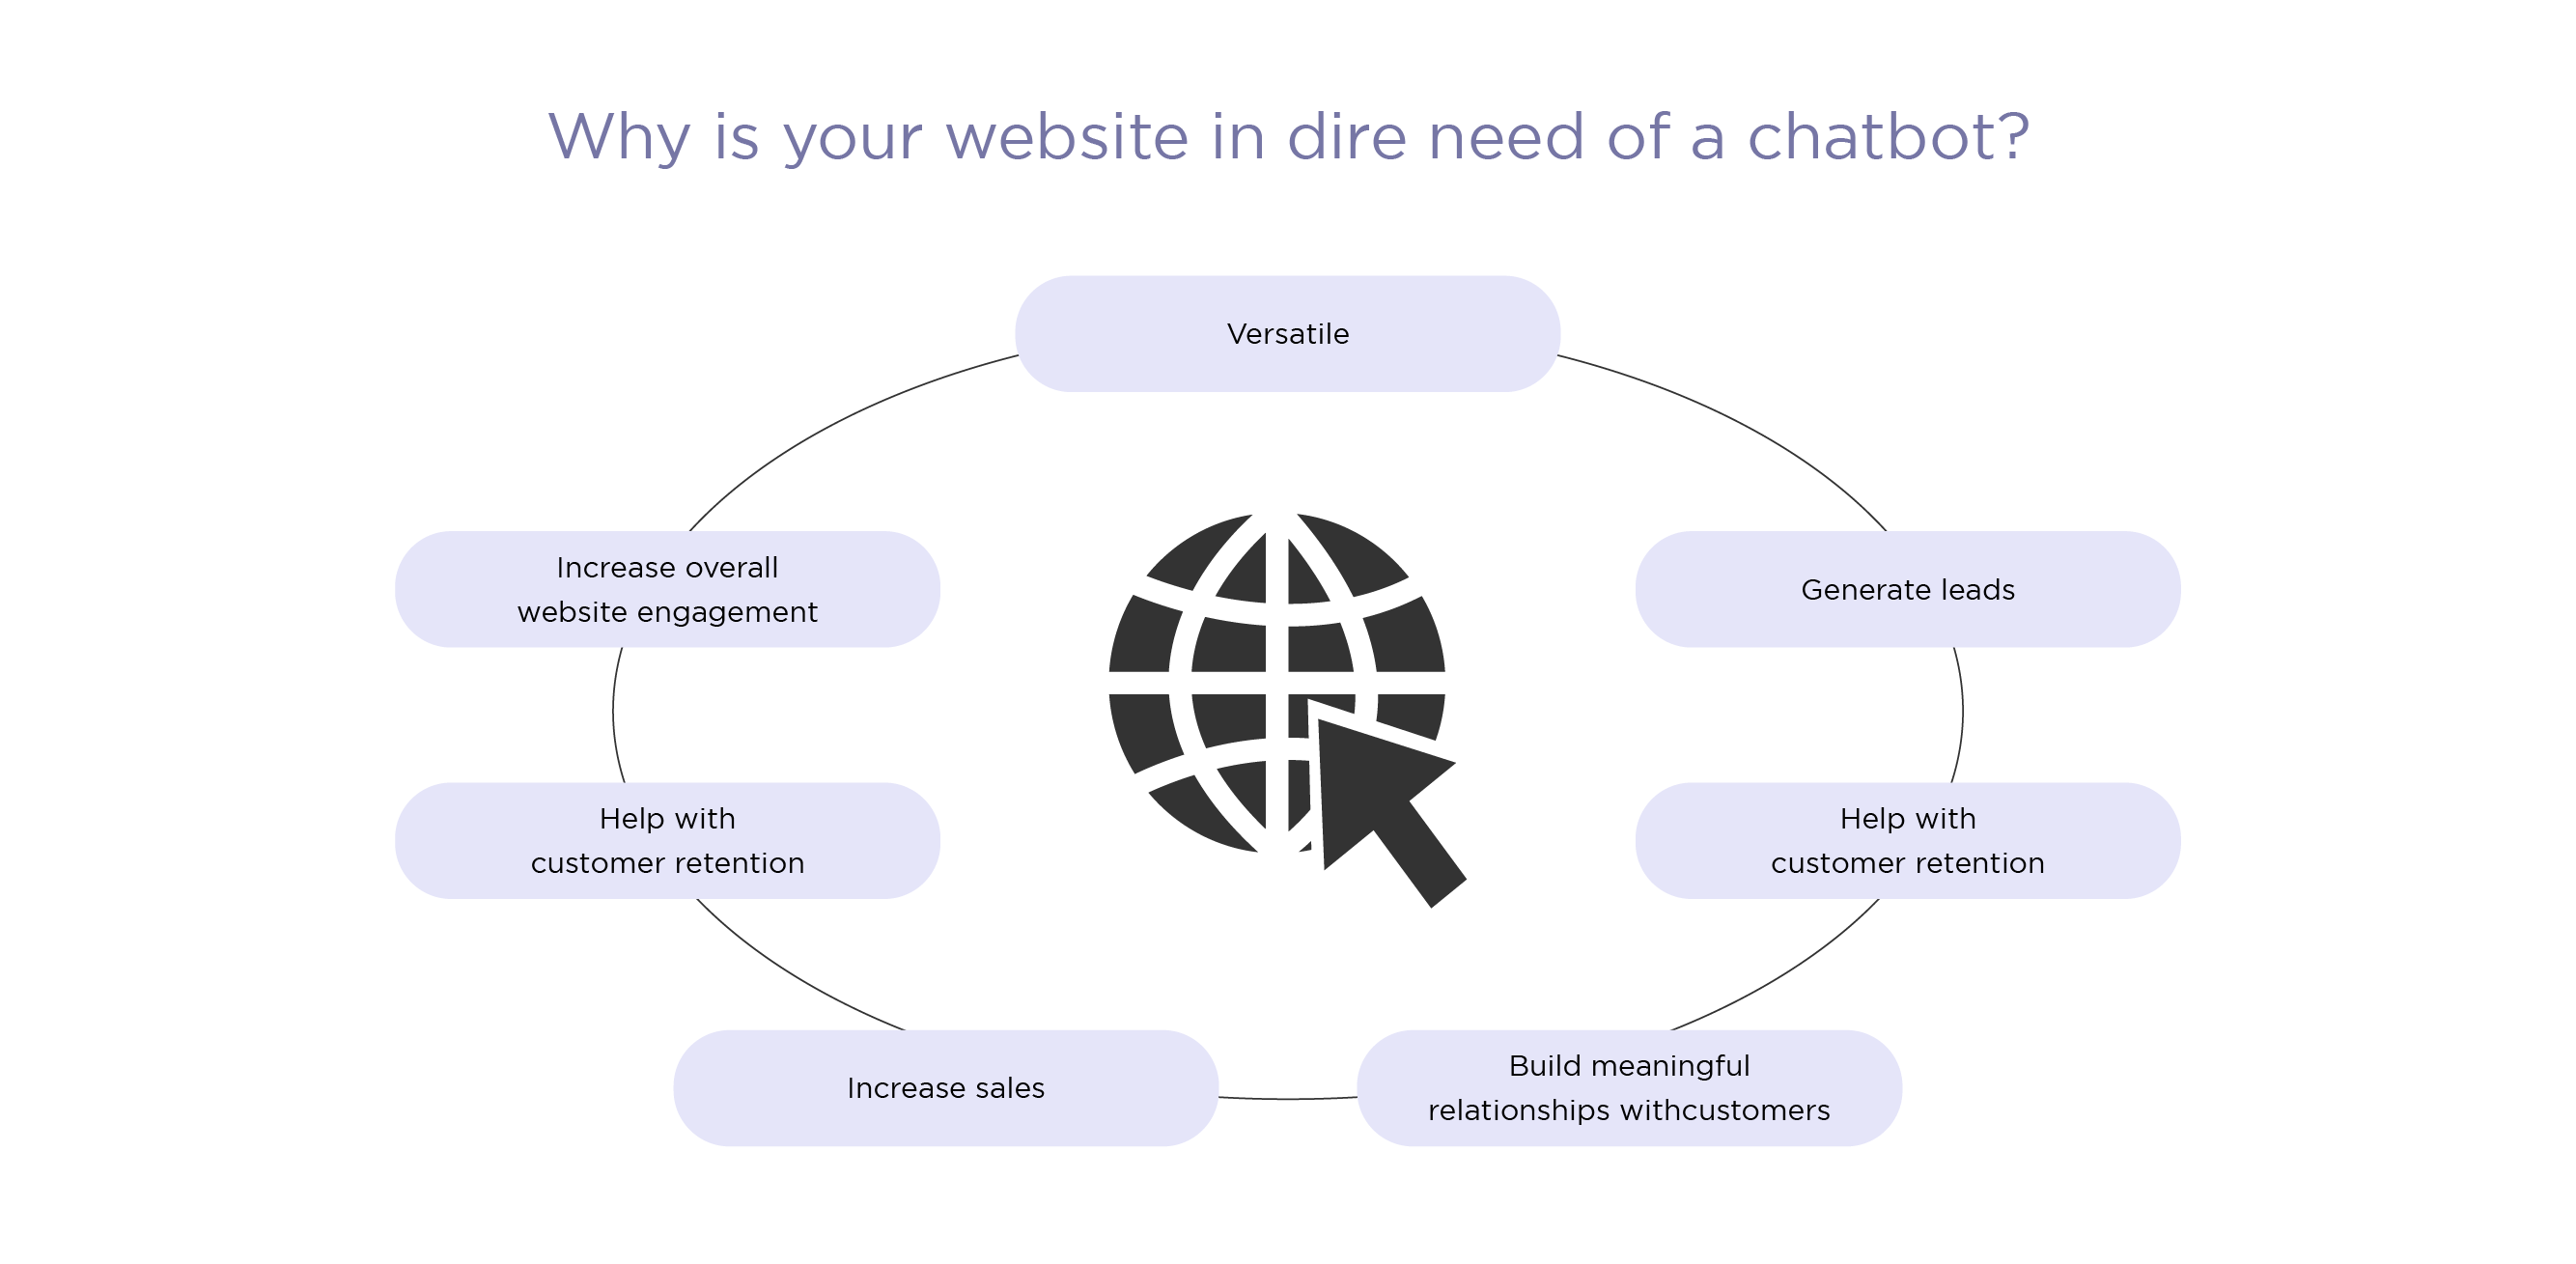 Why is your website in dire need of a chatbot?